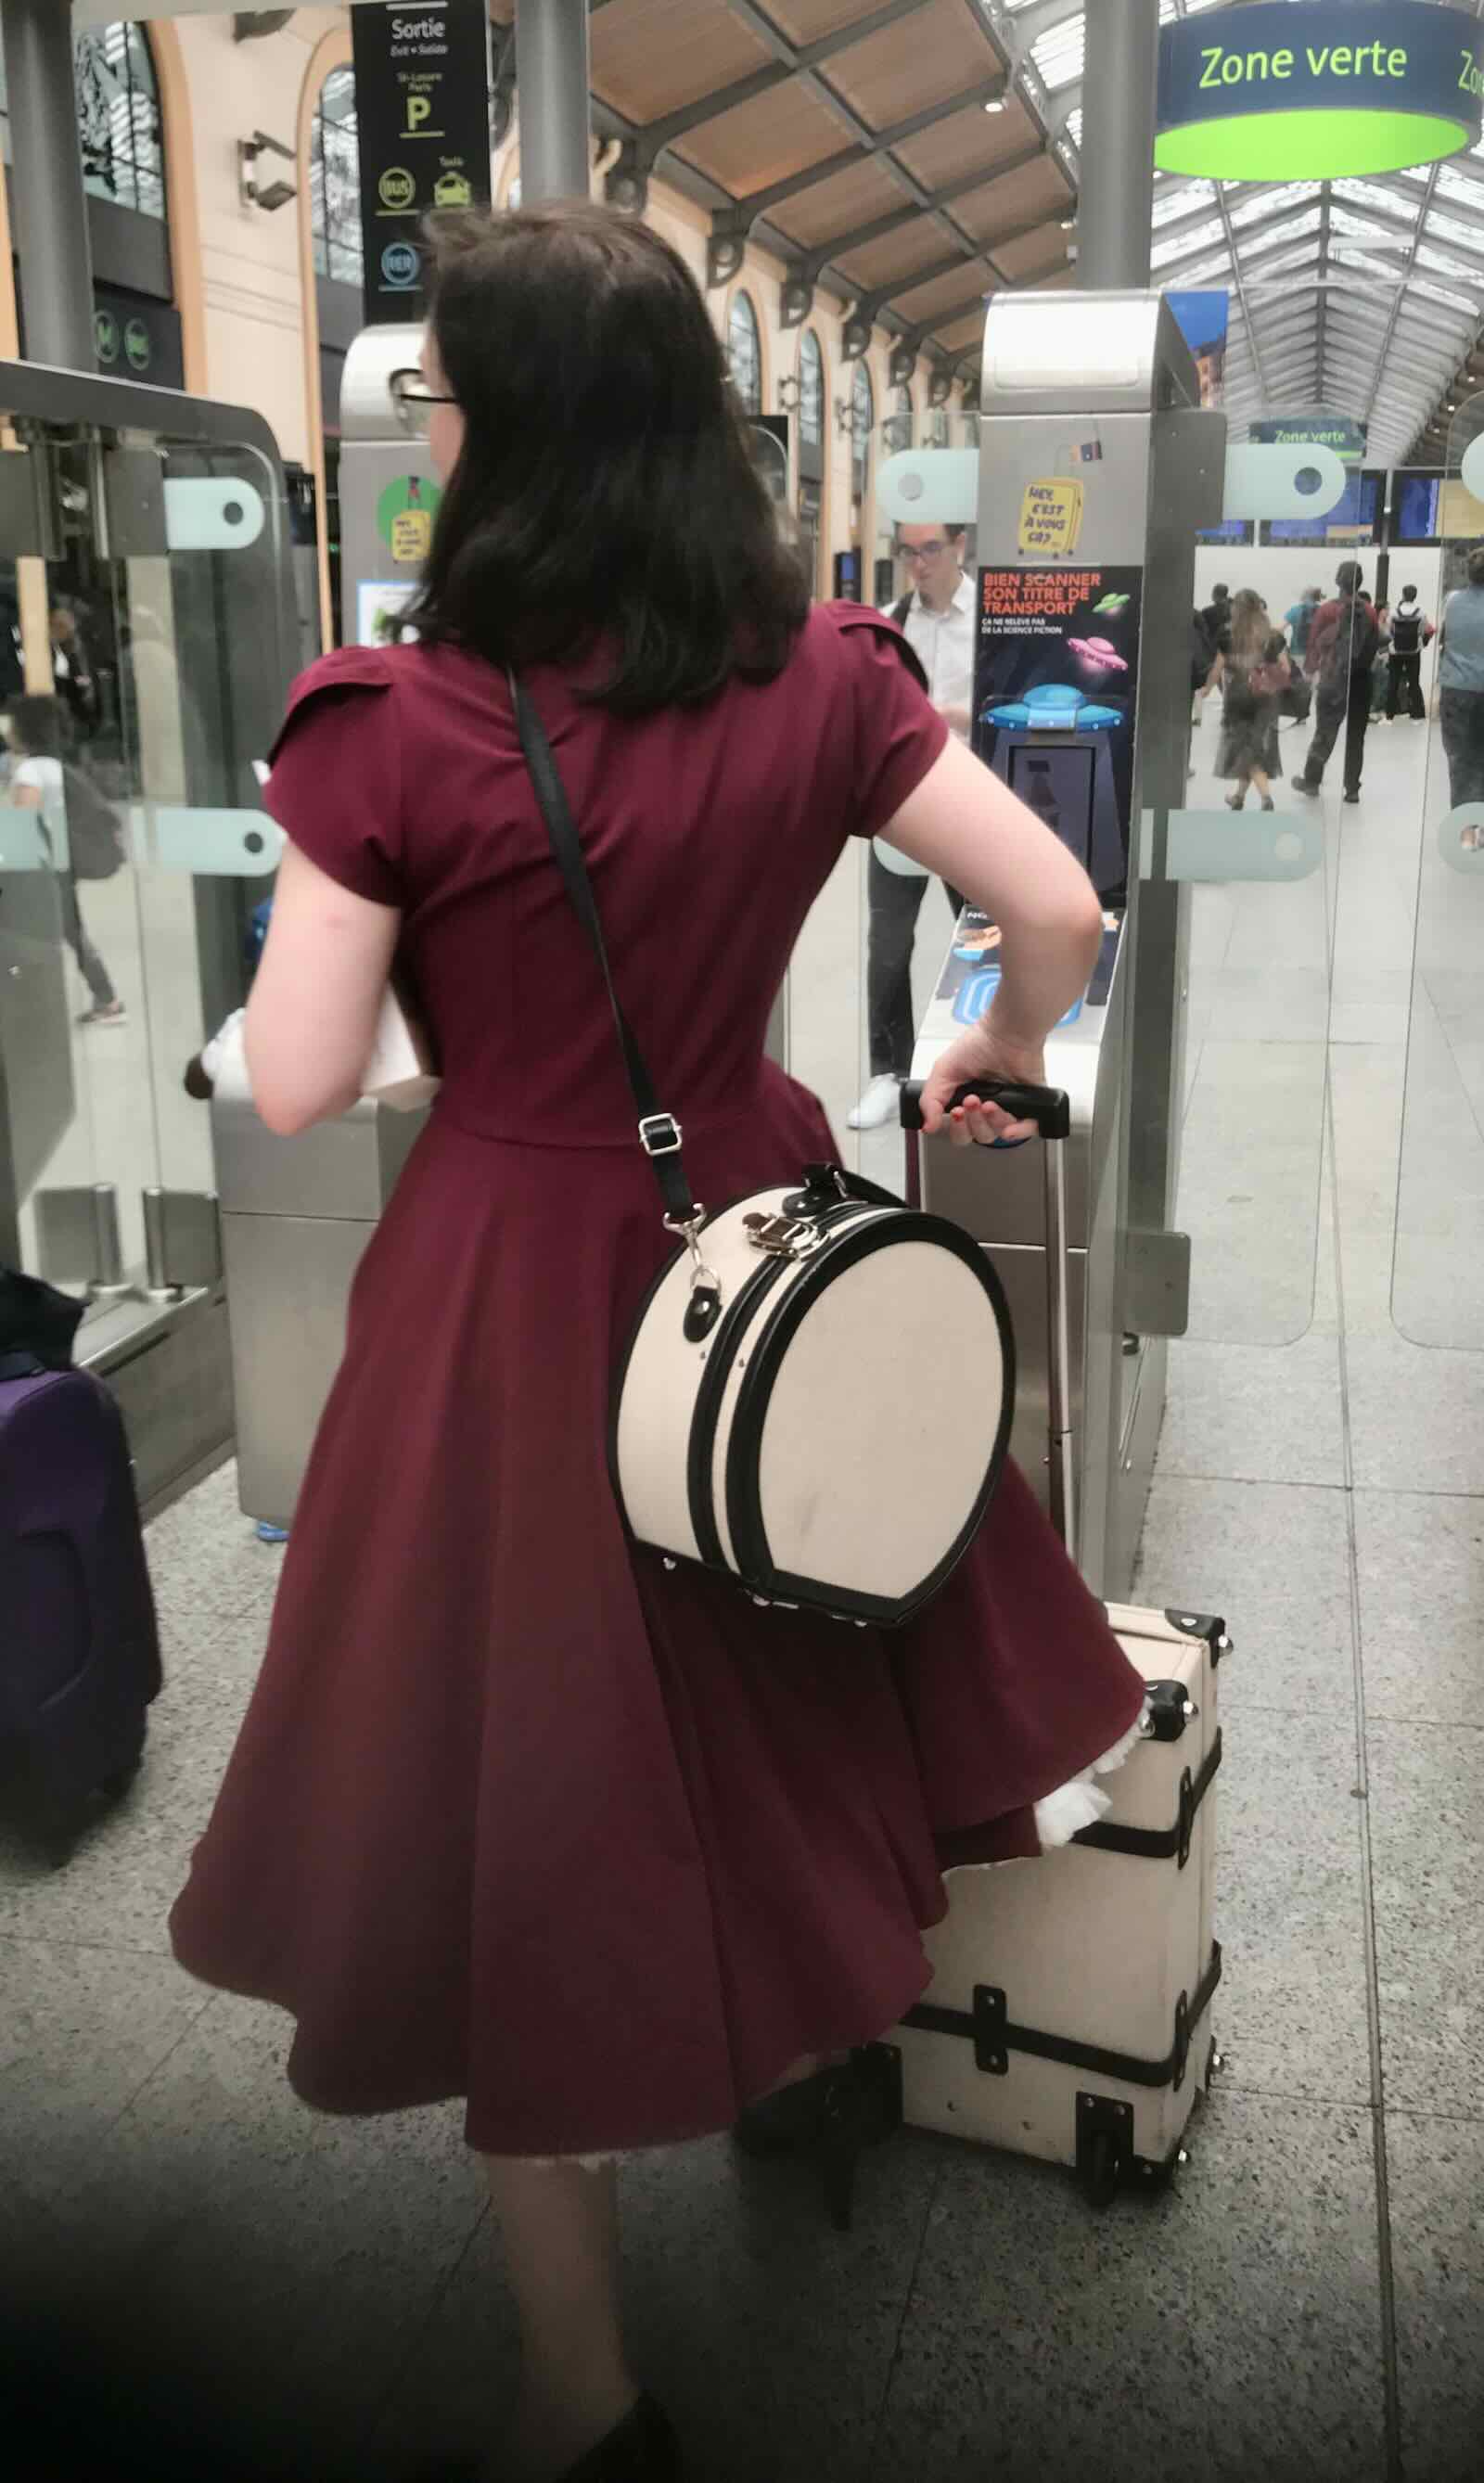 Girl in red dress with luggage boarding train